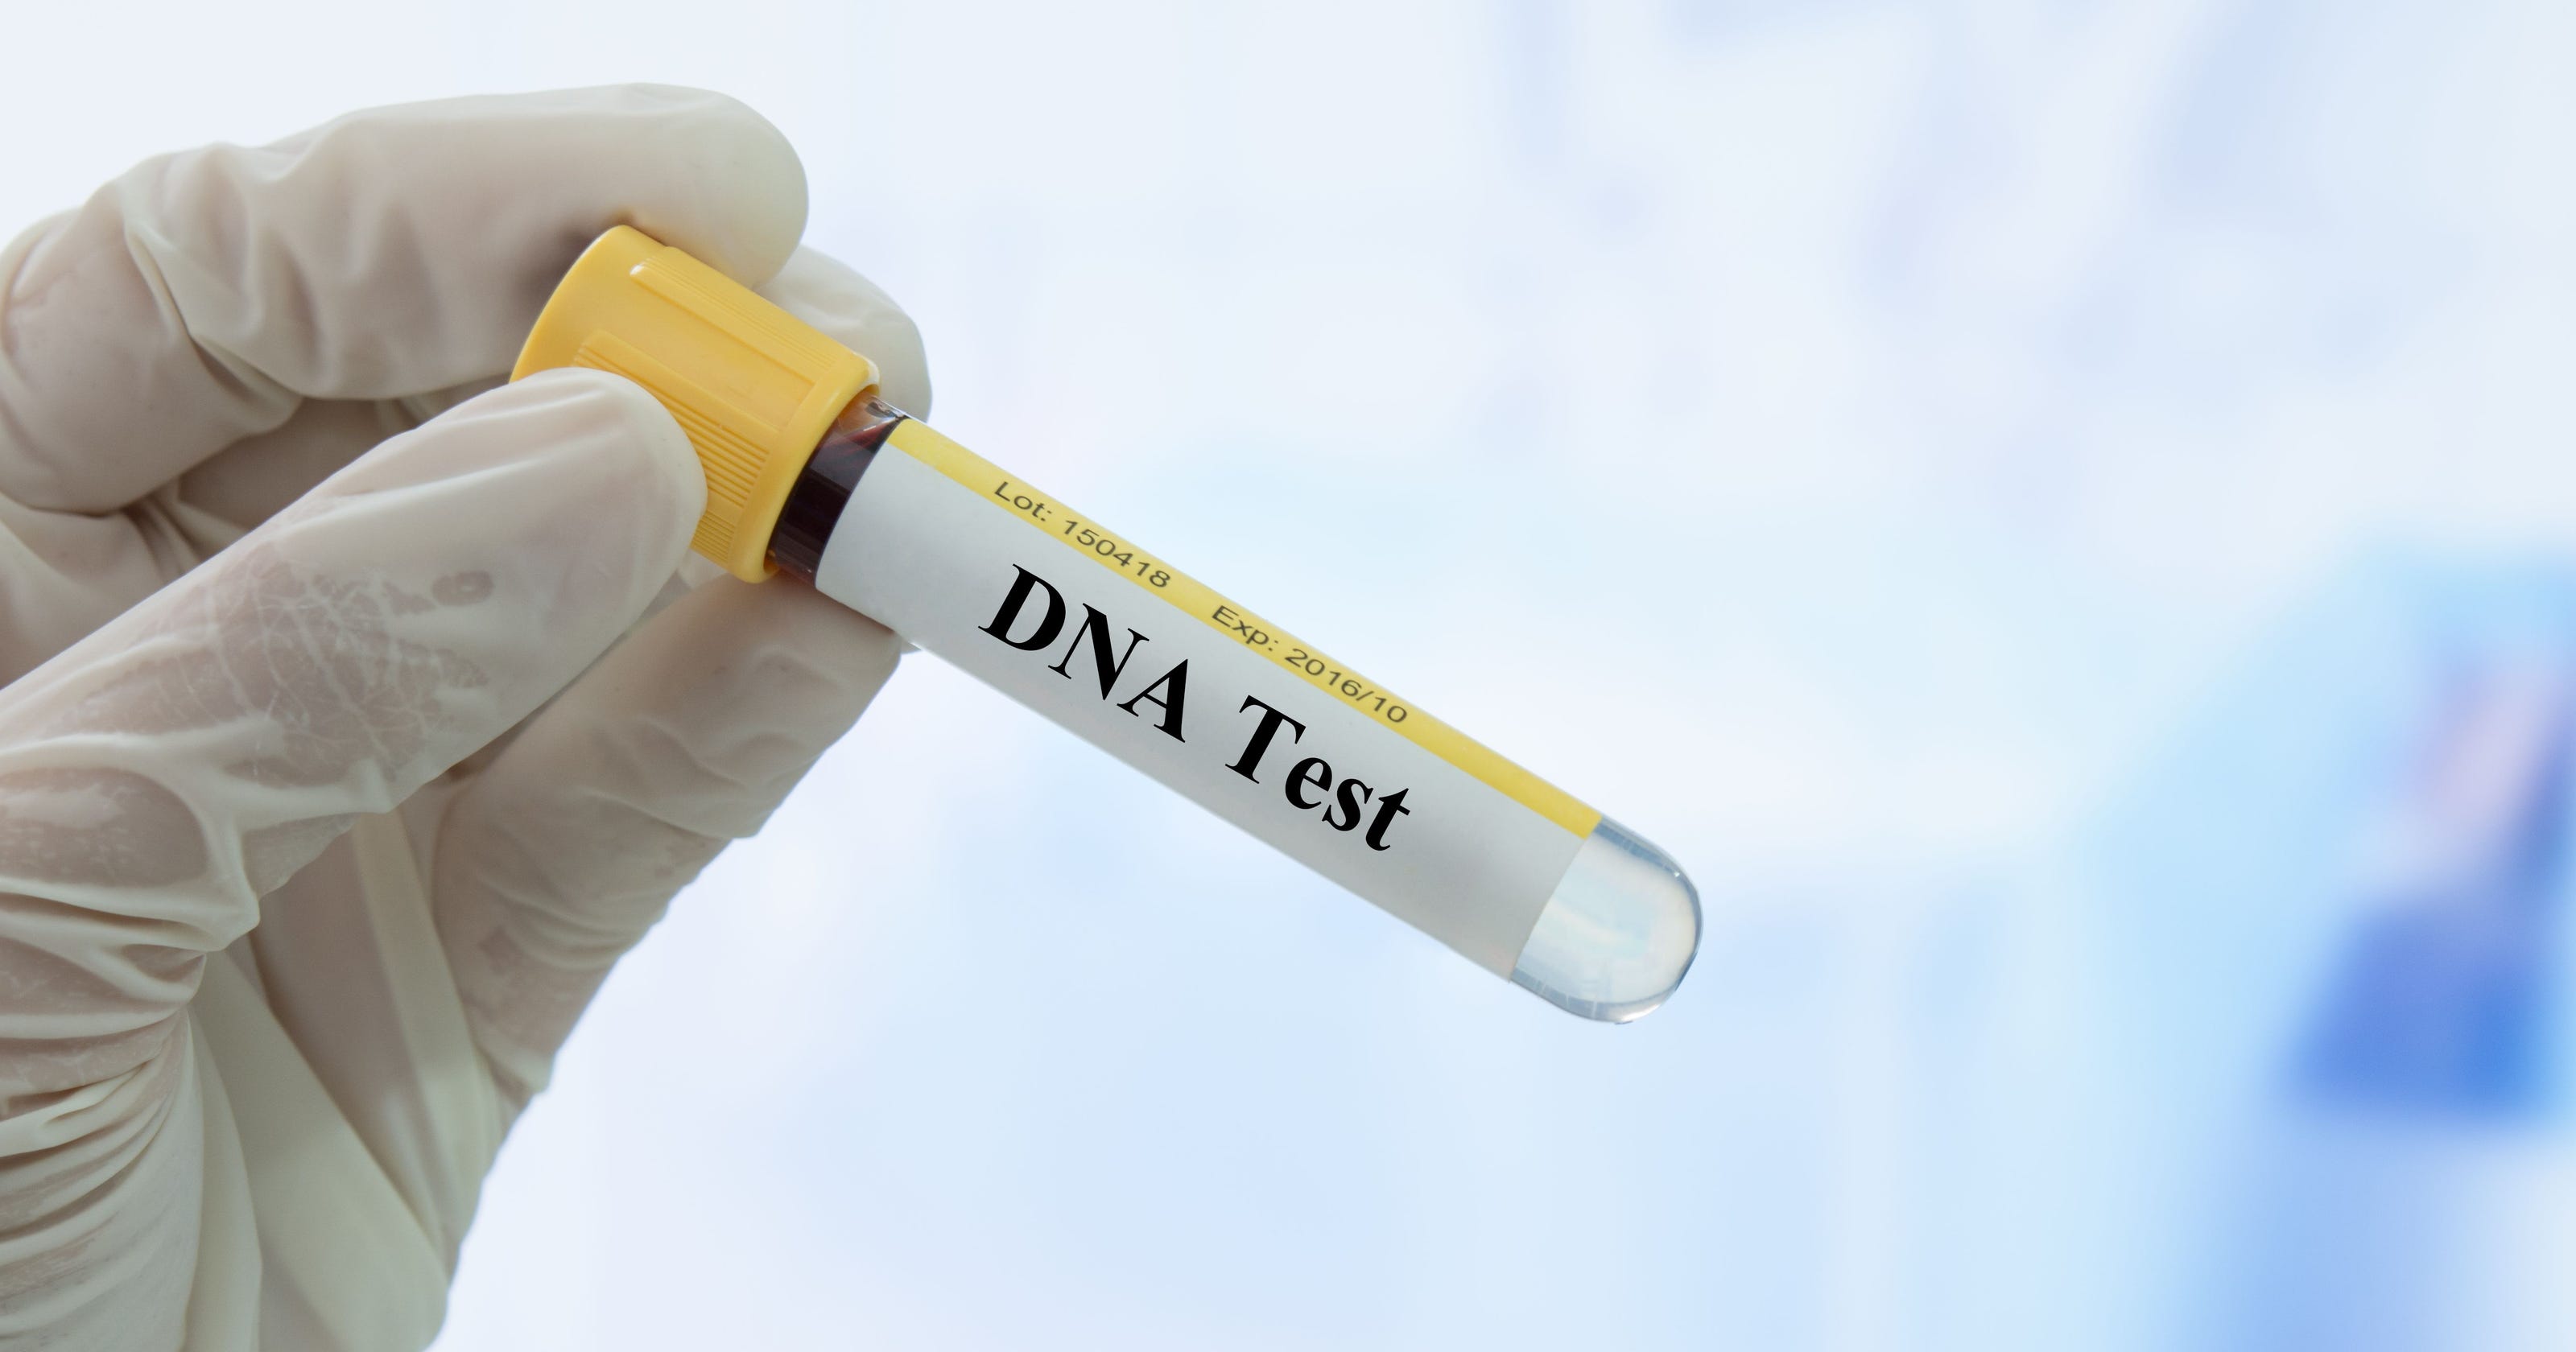 Woman admits to cheating 2 weeks before wedding as husband requests DNA on radio